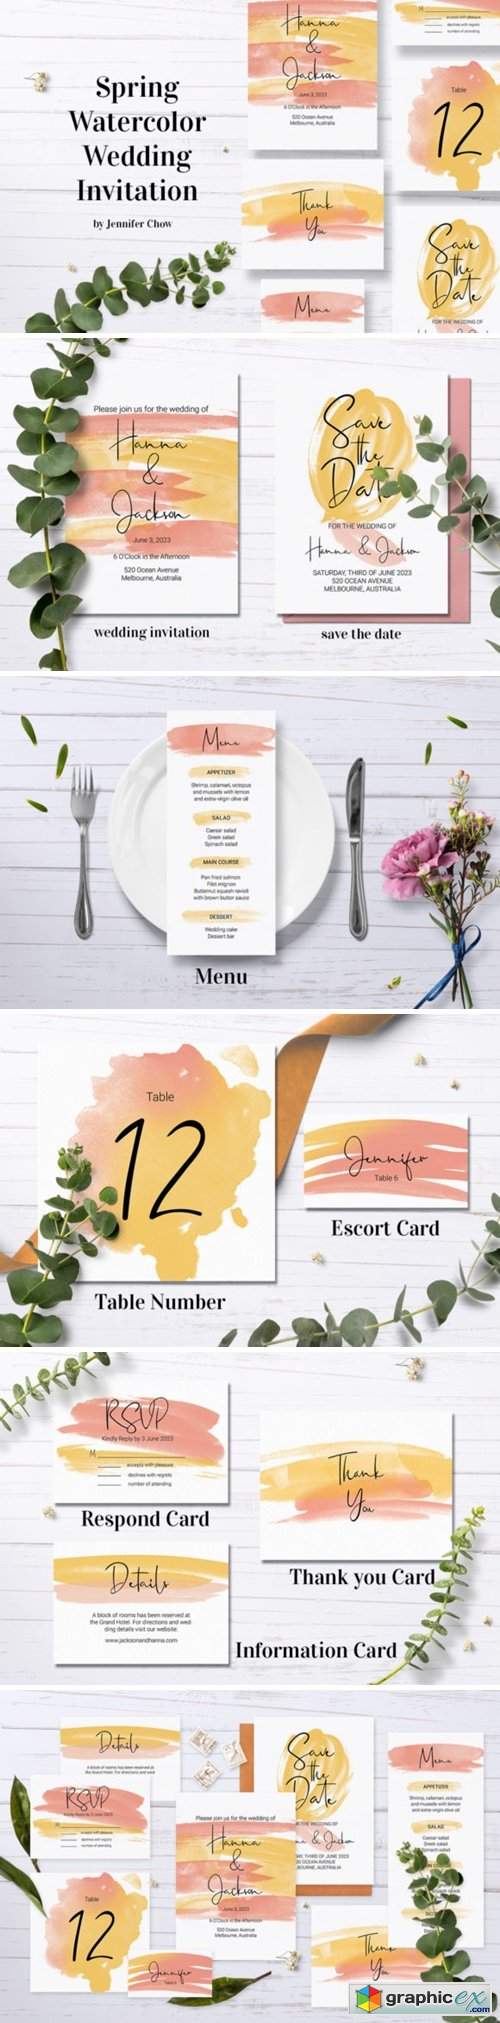  Spring Watercolor Wedding Stationery Set 